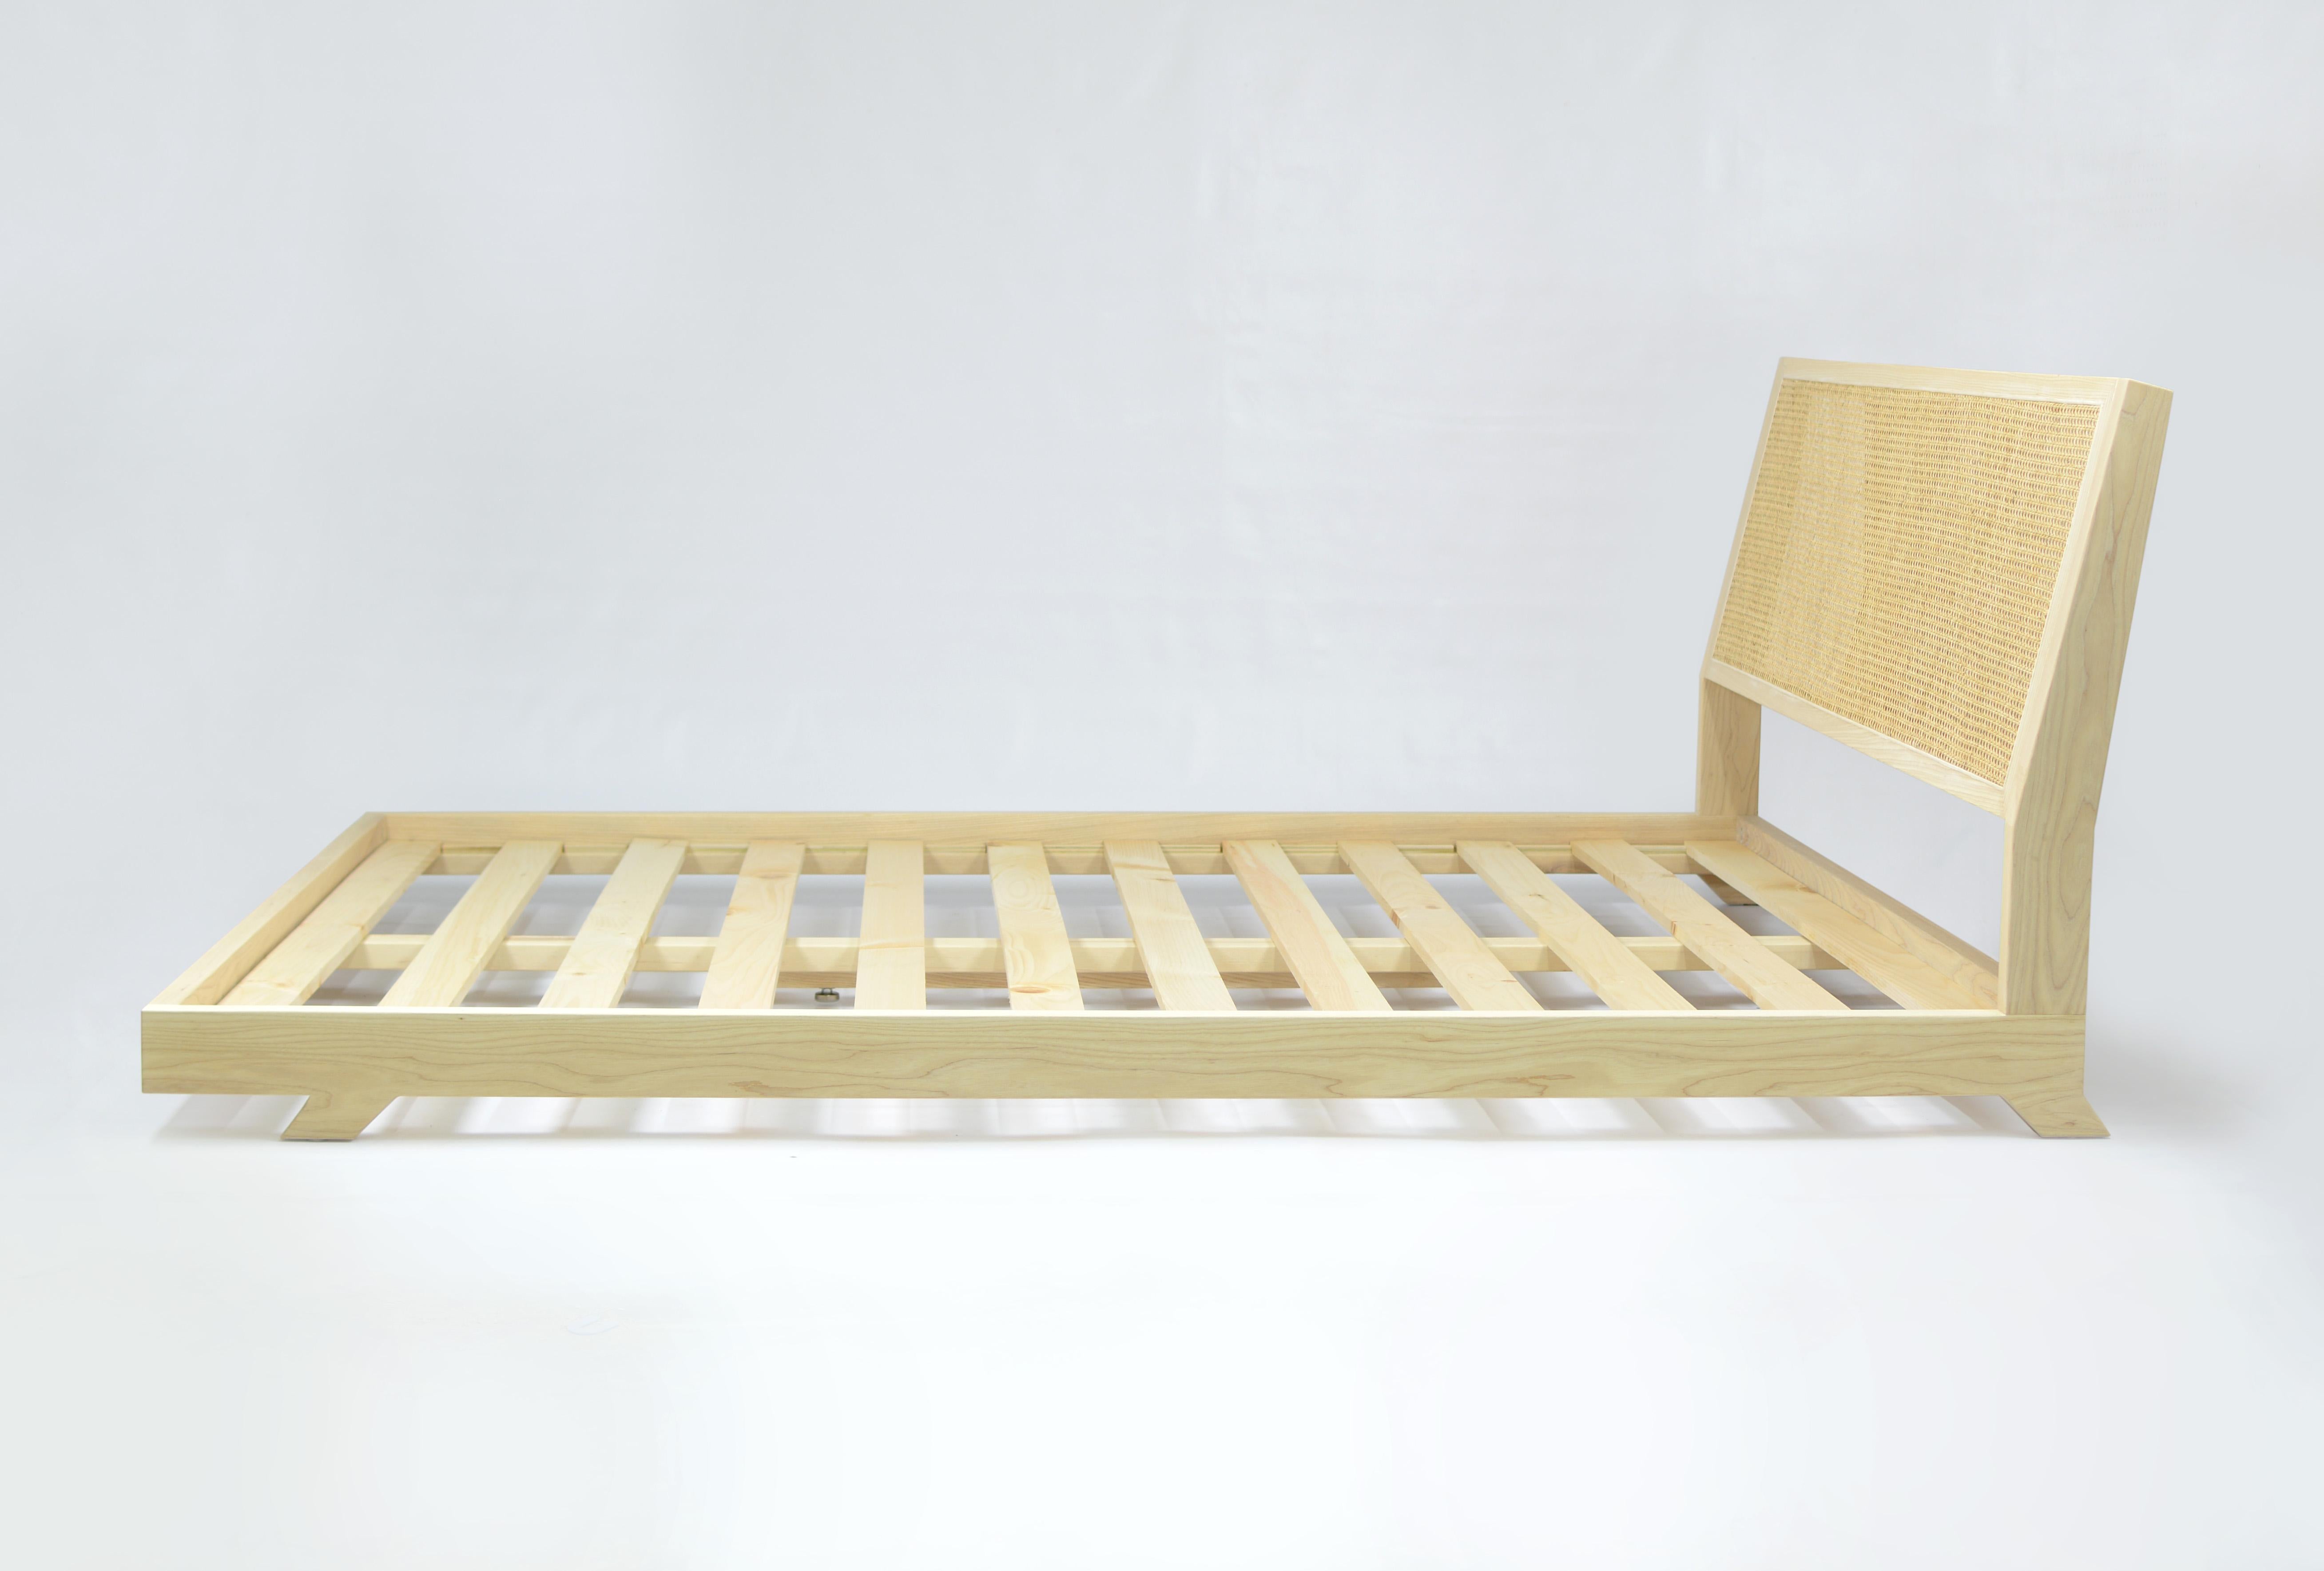 Handmade to order, this bed is made from solid ashwood and natural reed cane. The frame uses sturdy knockdown fasteners to allow for a quick and easy setup that will be long lasting and robust. Available in all mattress sizes. Additional material